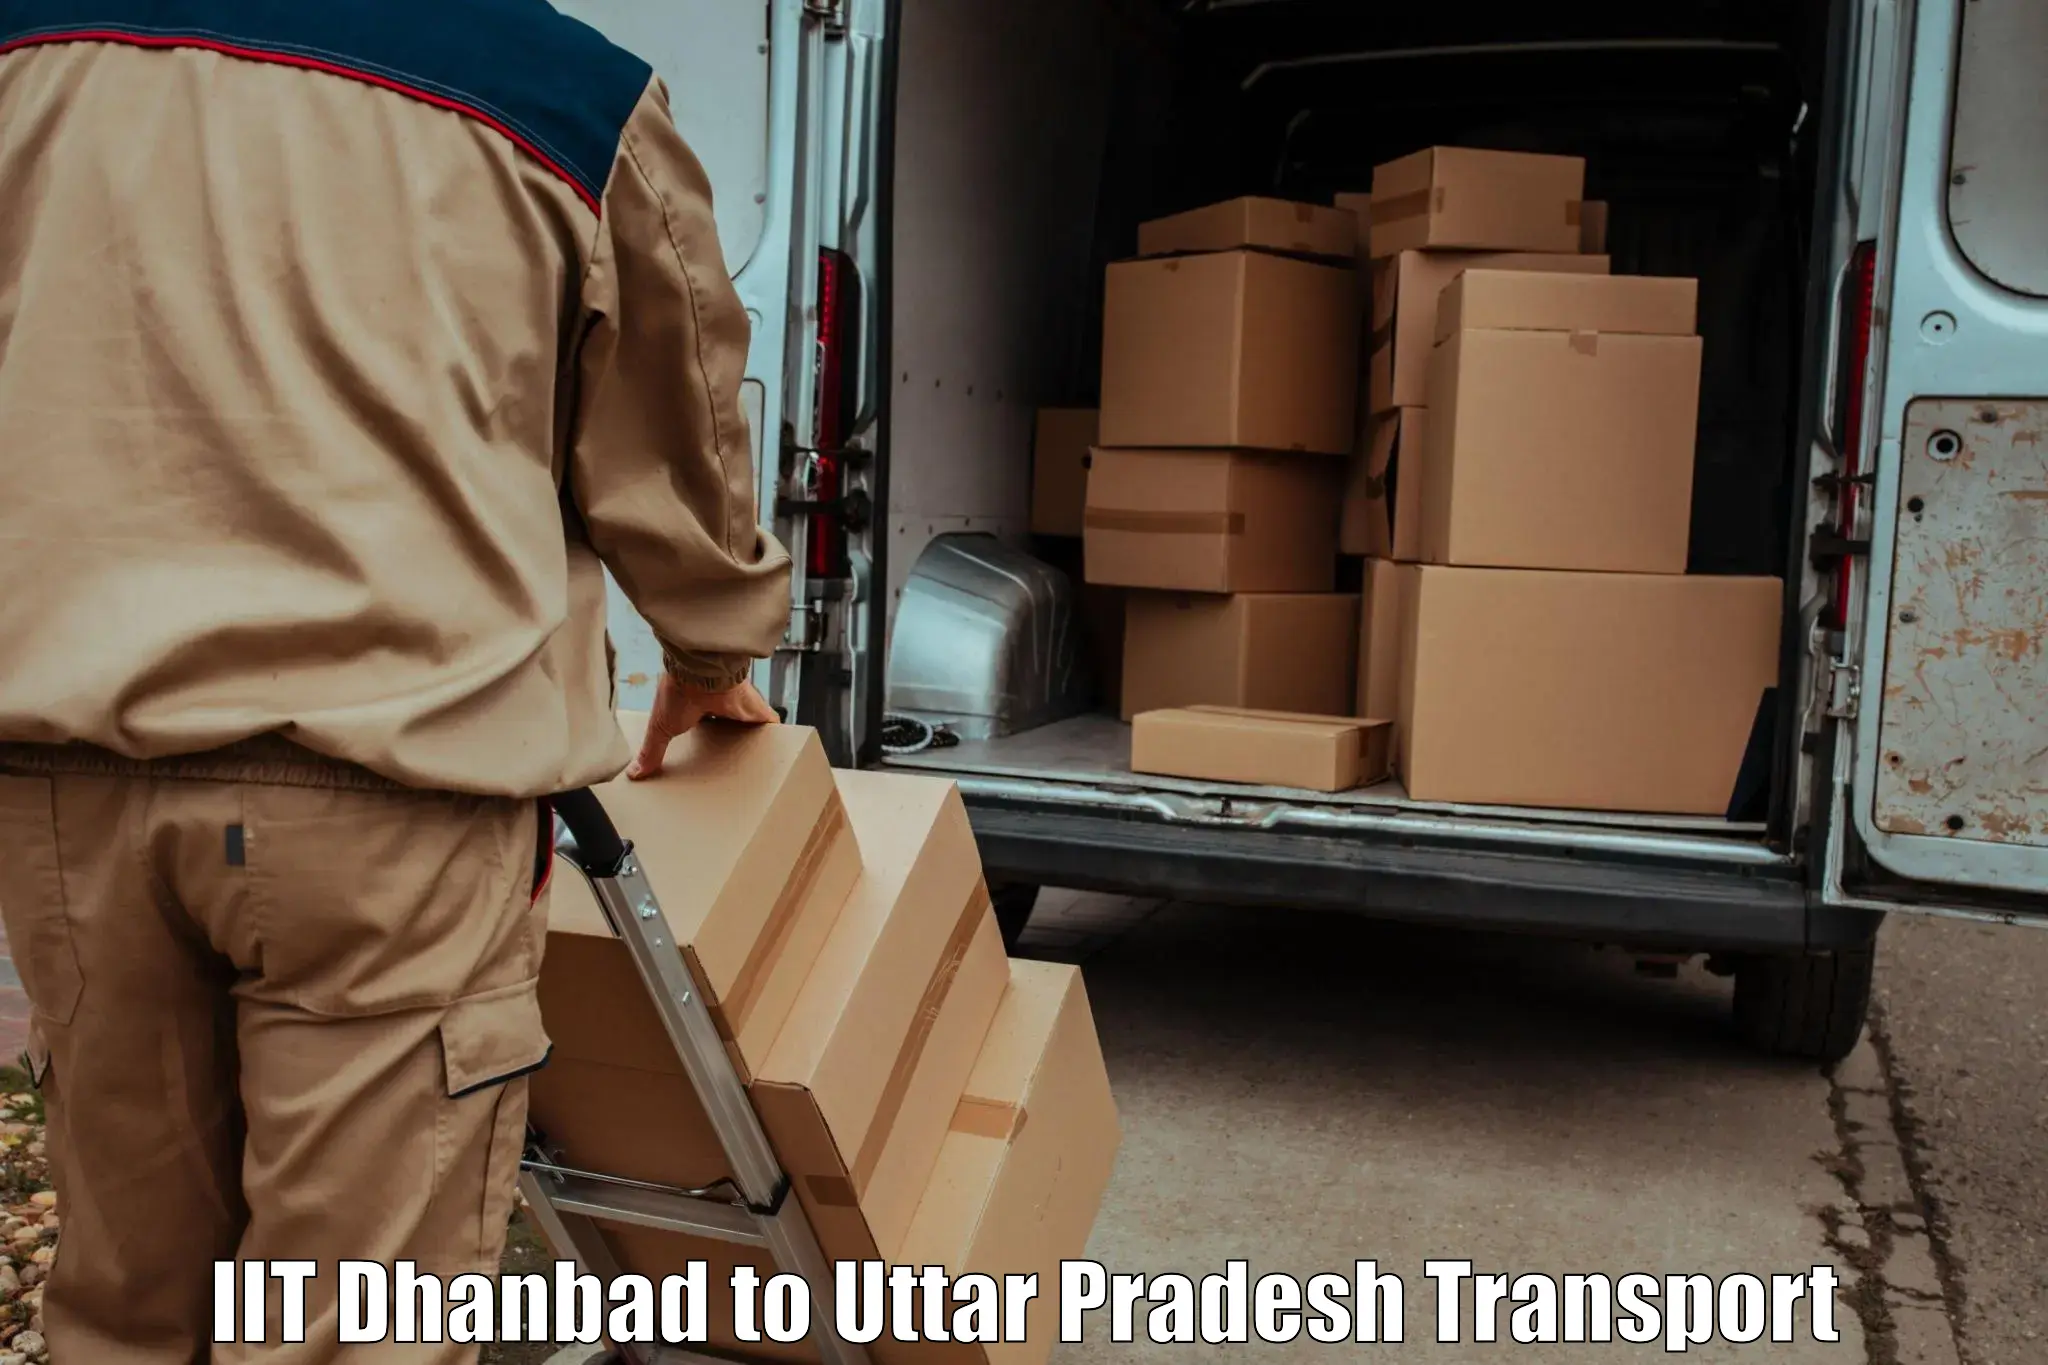 Cargo transportation services IIT Dhanbad to Kanth